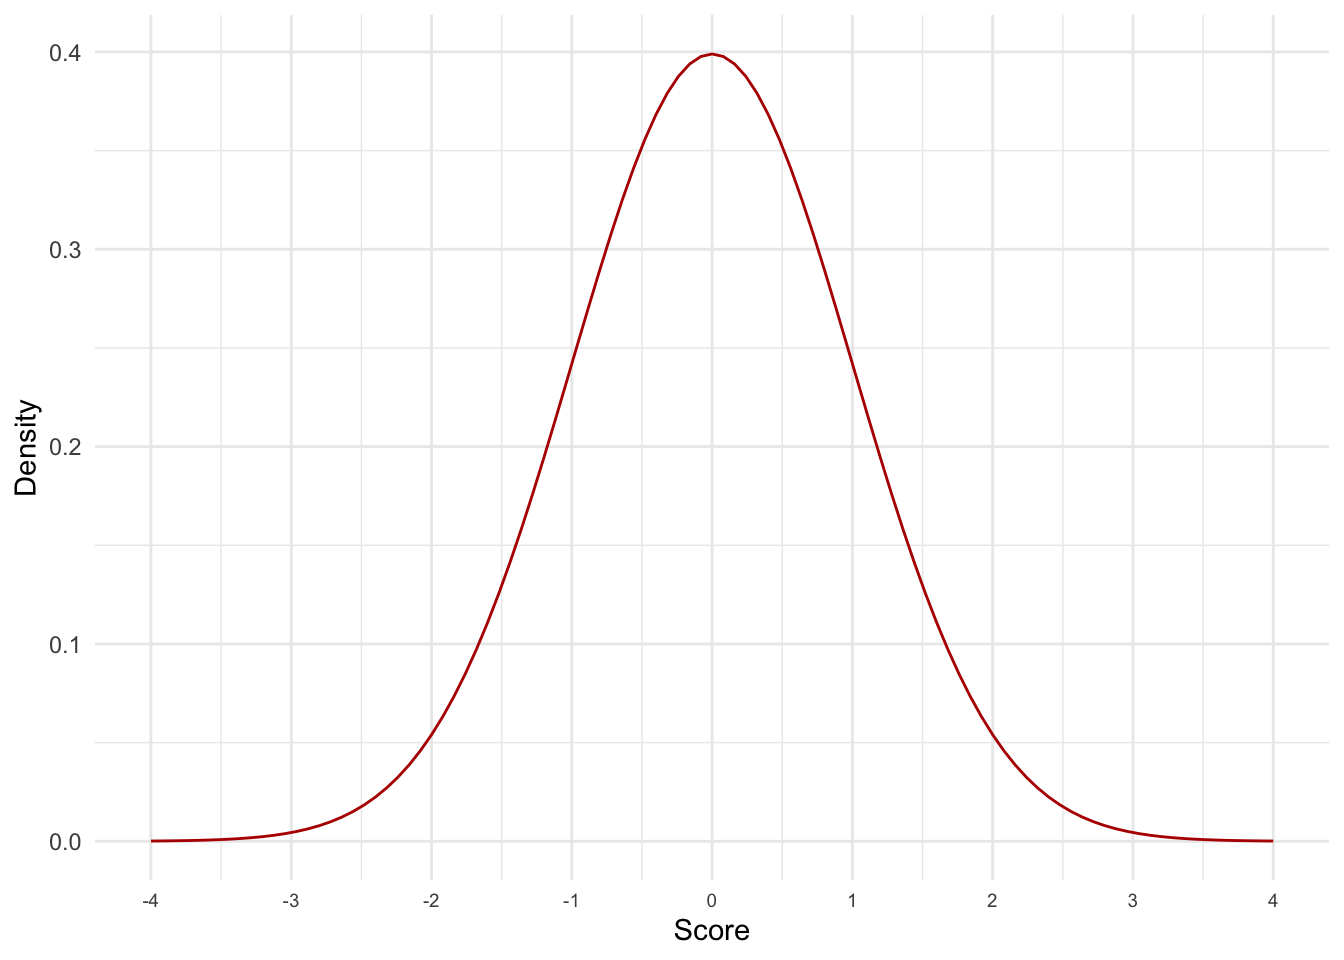 A normal distribution (the curve shows the idealized shape)